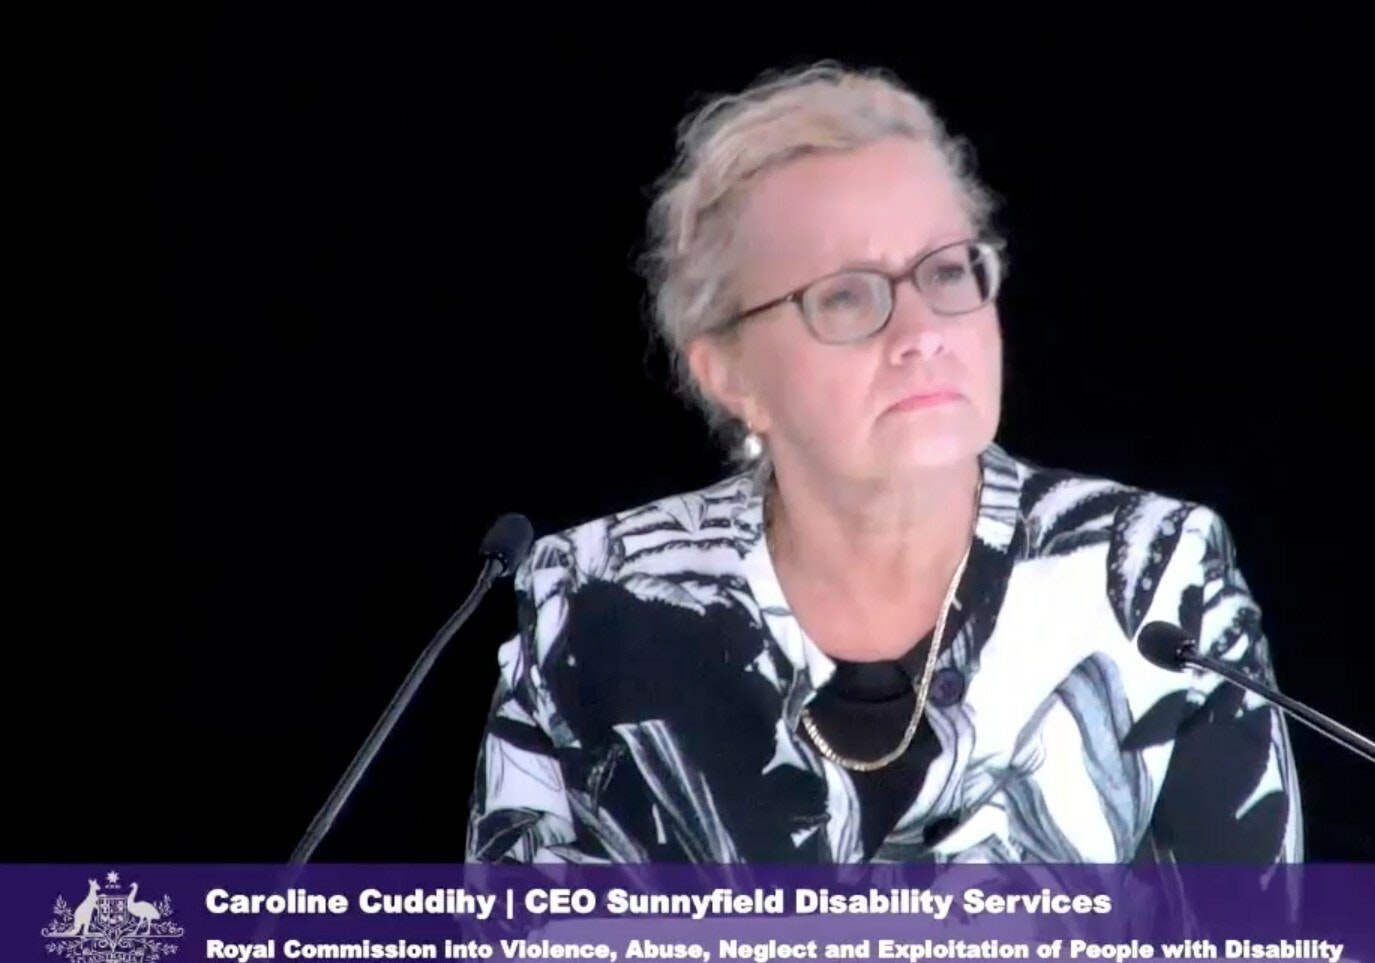  Sunnyfield Disability Services CEO Caroline Cuddihy fronted the disability royal commission over three days last week. [Source: Disability Royal Commission]
